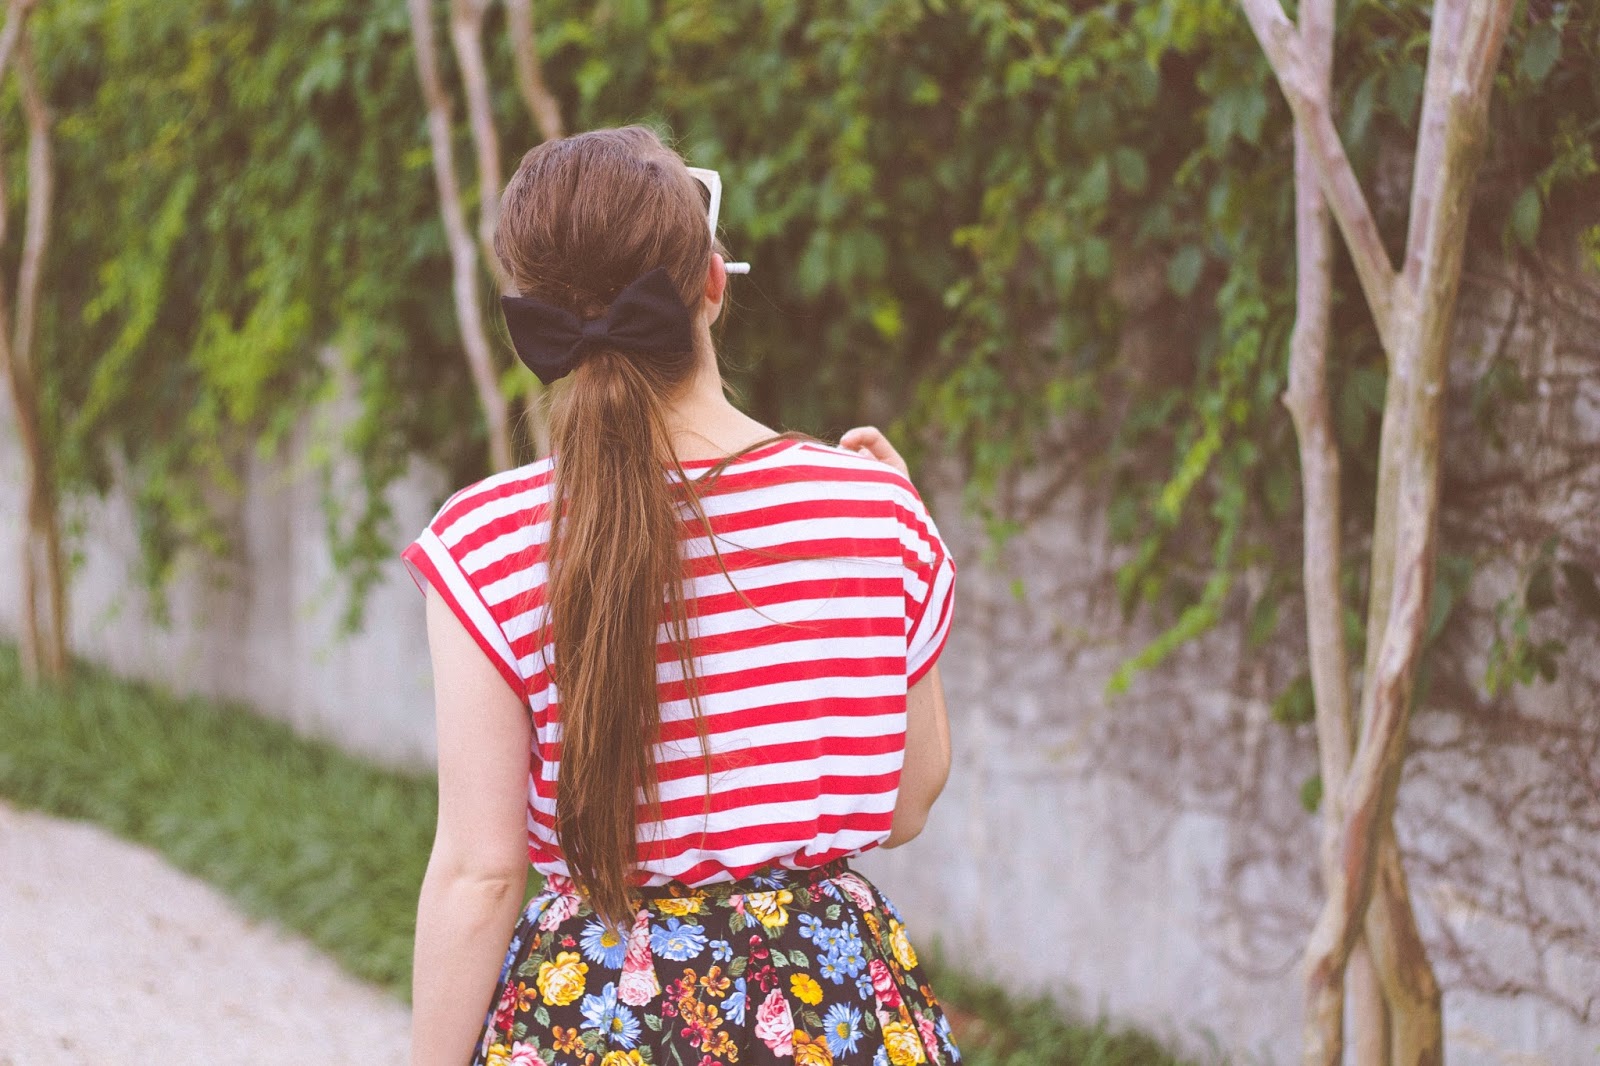 Mixing prints outfit, striped t shirt, floral mini skirt, forever 21, asos, retro style, 60's style, style, fashion, girly, french, lana del rey style, taylor swift style, personal style blogger, film blogger, movie blogger. cinema, vintage